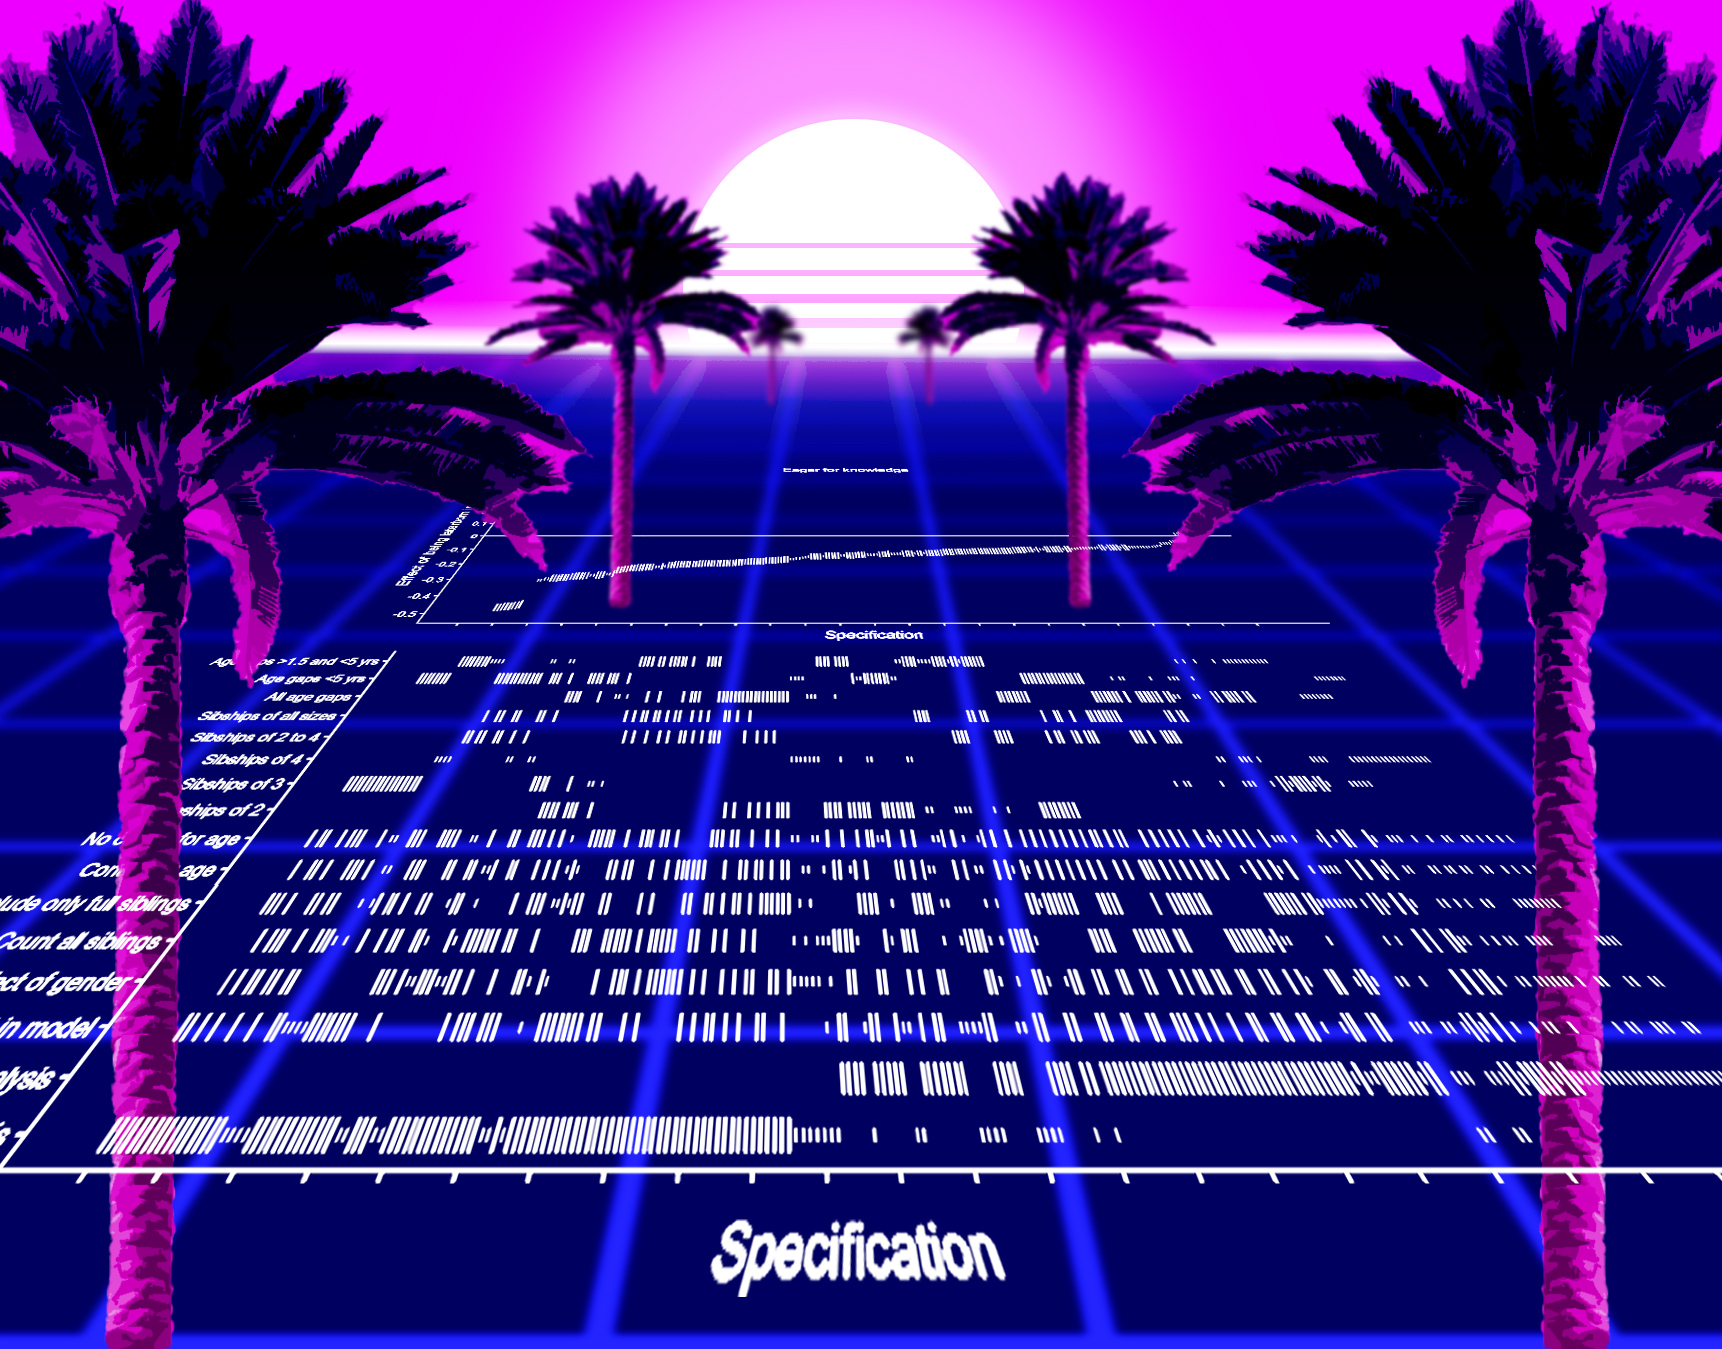 A specification curve plot presented in outrun-style with an underlying grid and palm trees